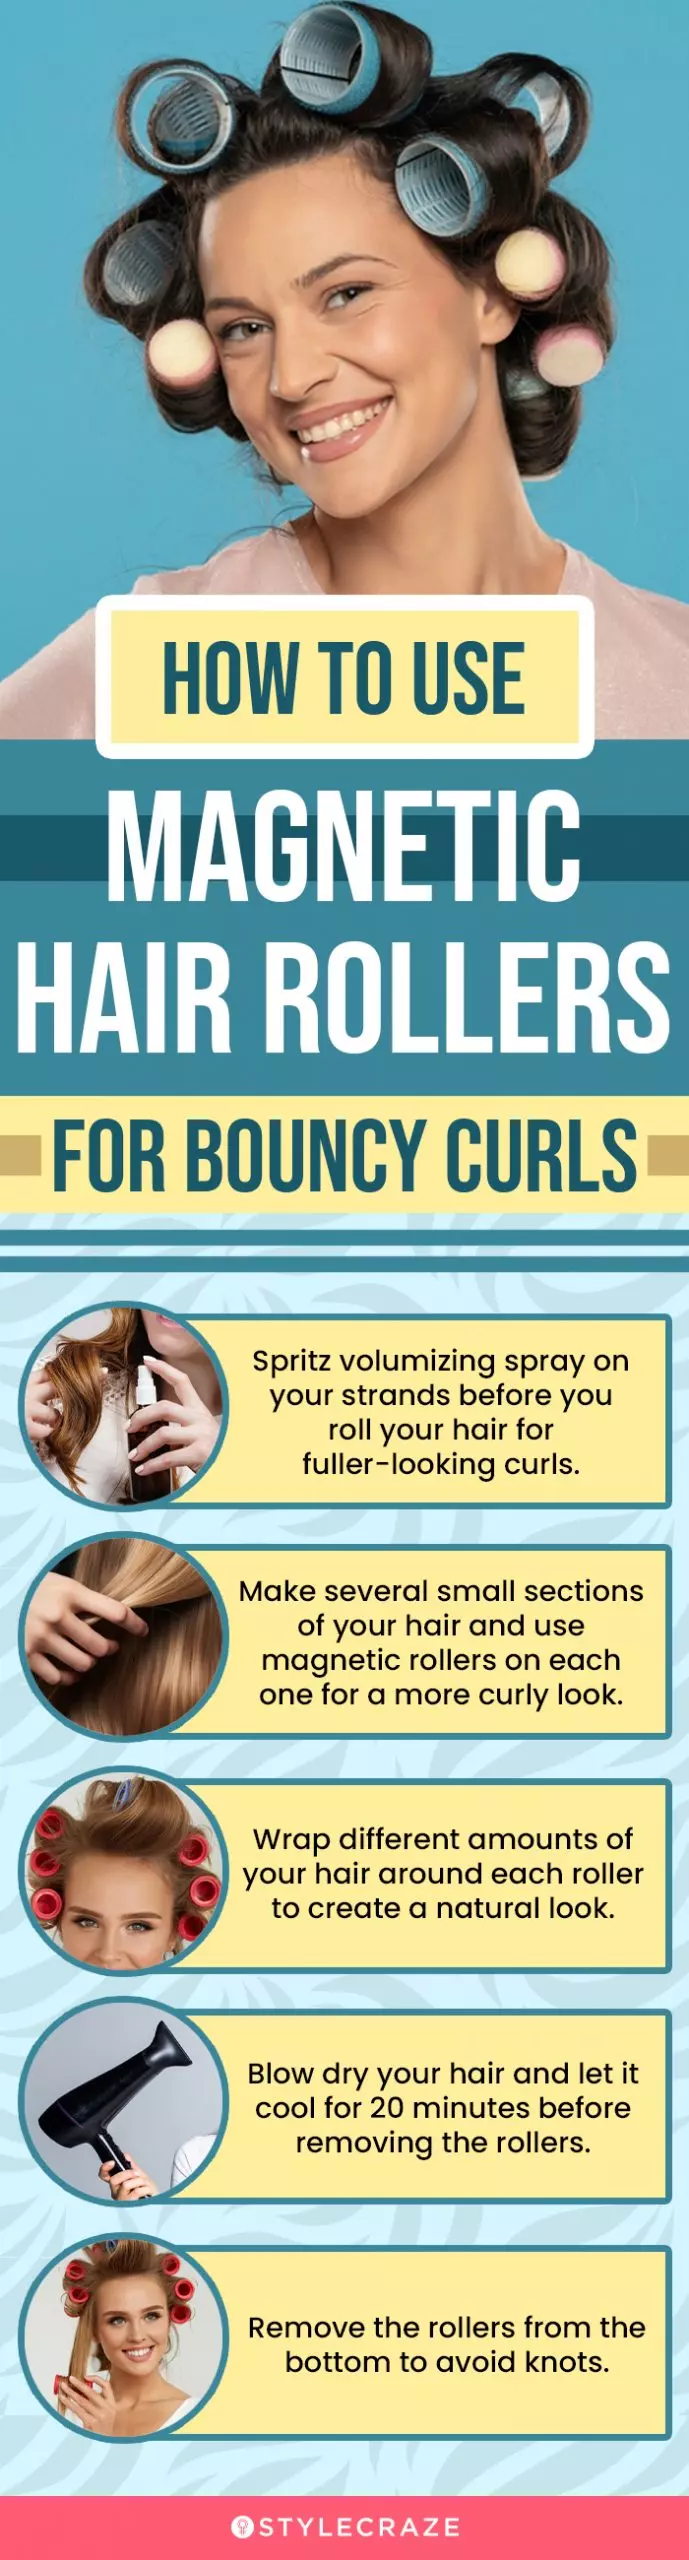 How To Use Magnetic Hair Rollers For Bouncy Curls (infographic)